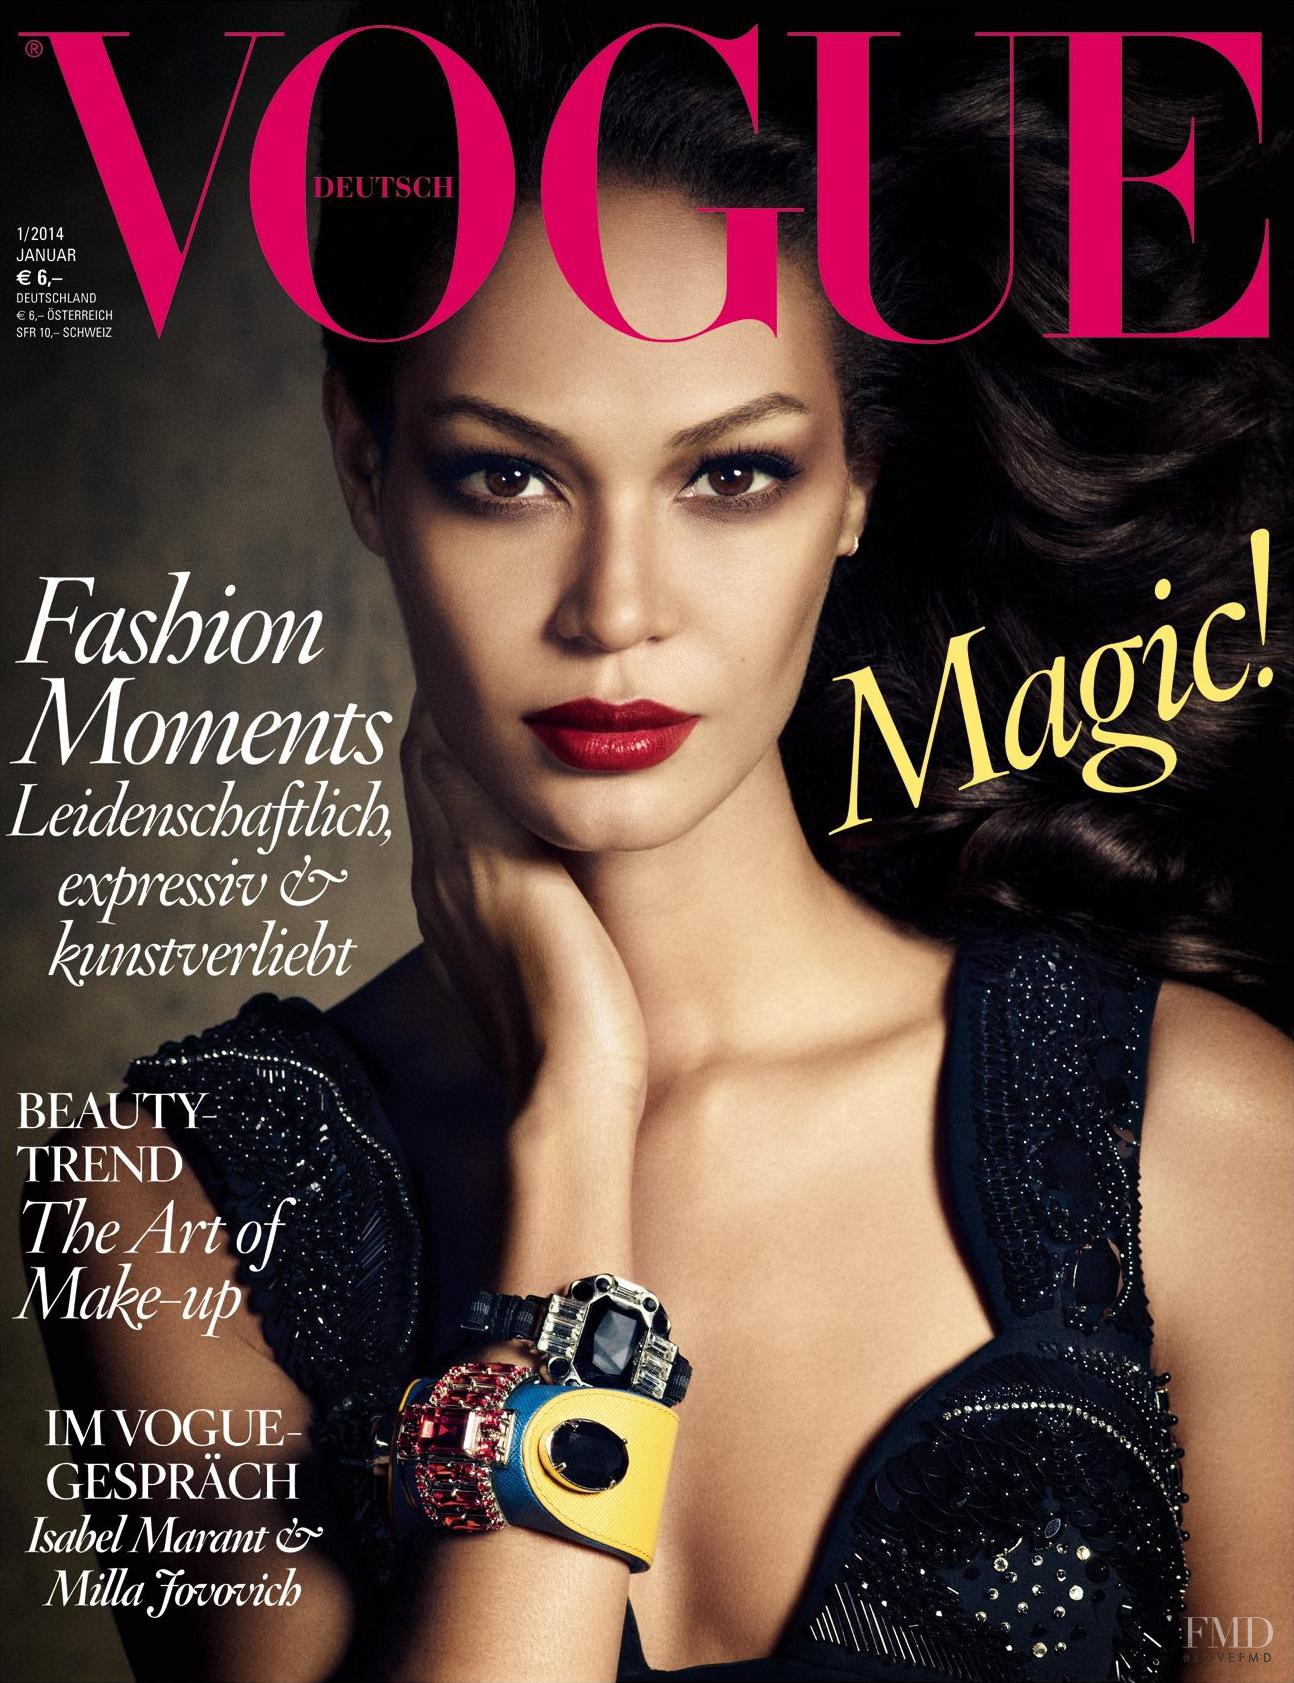 Cover of Vogue Germany with Joan Smalls, January 2014 (ID:25711 ...